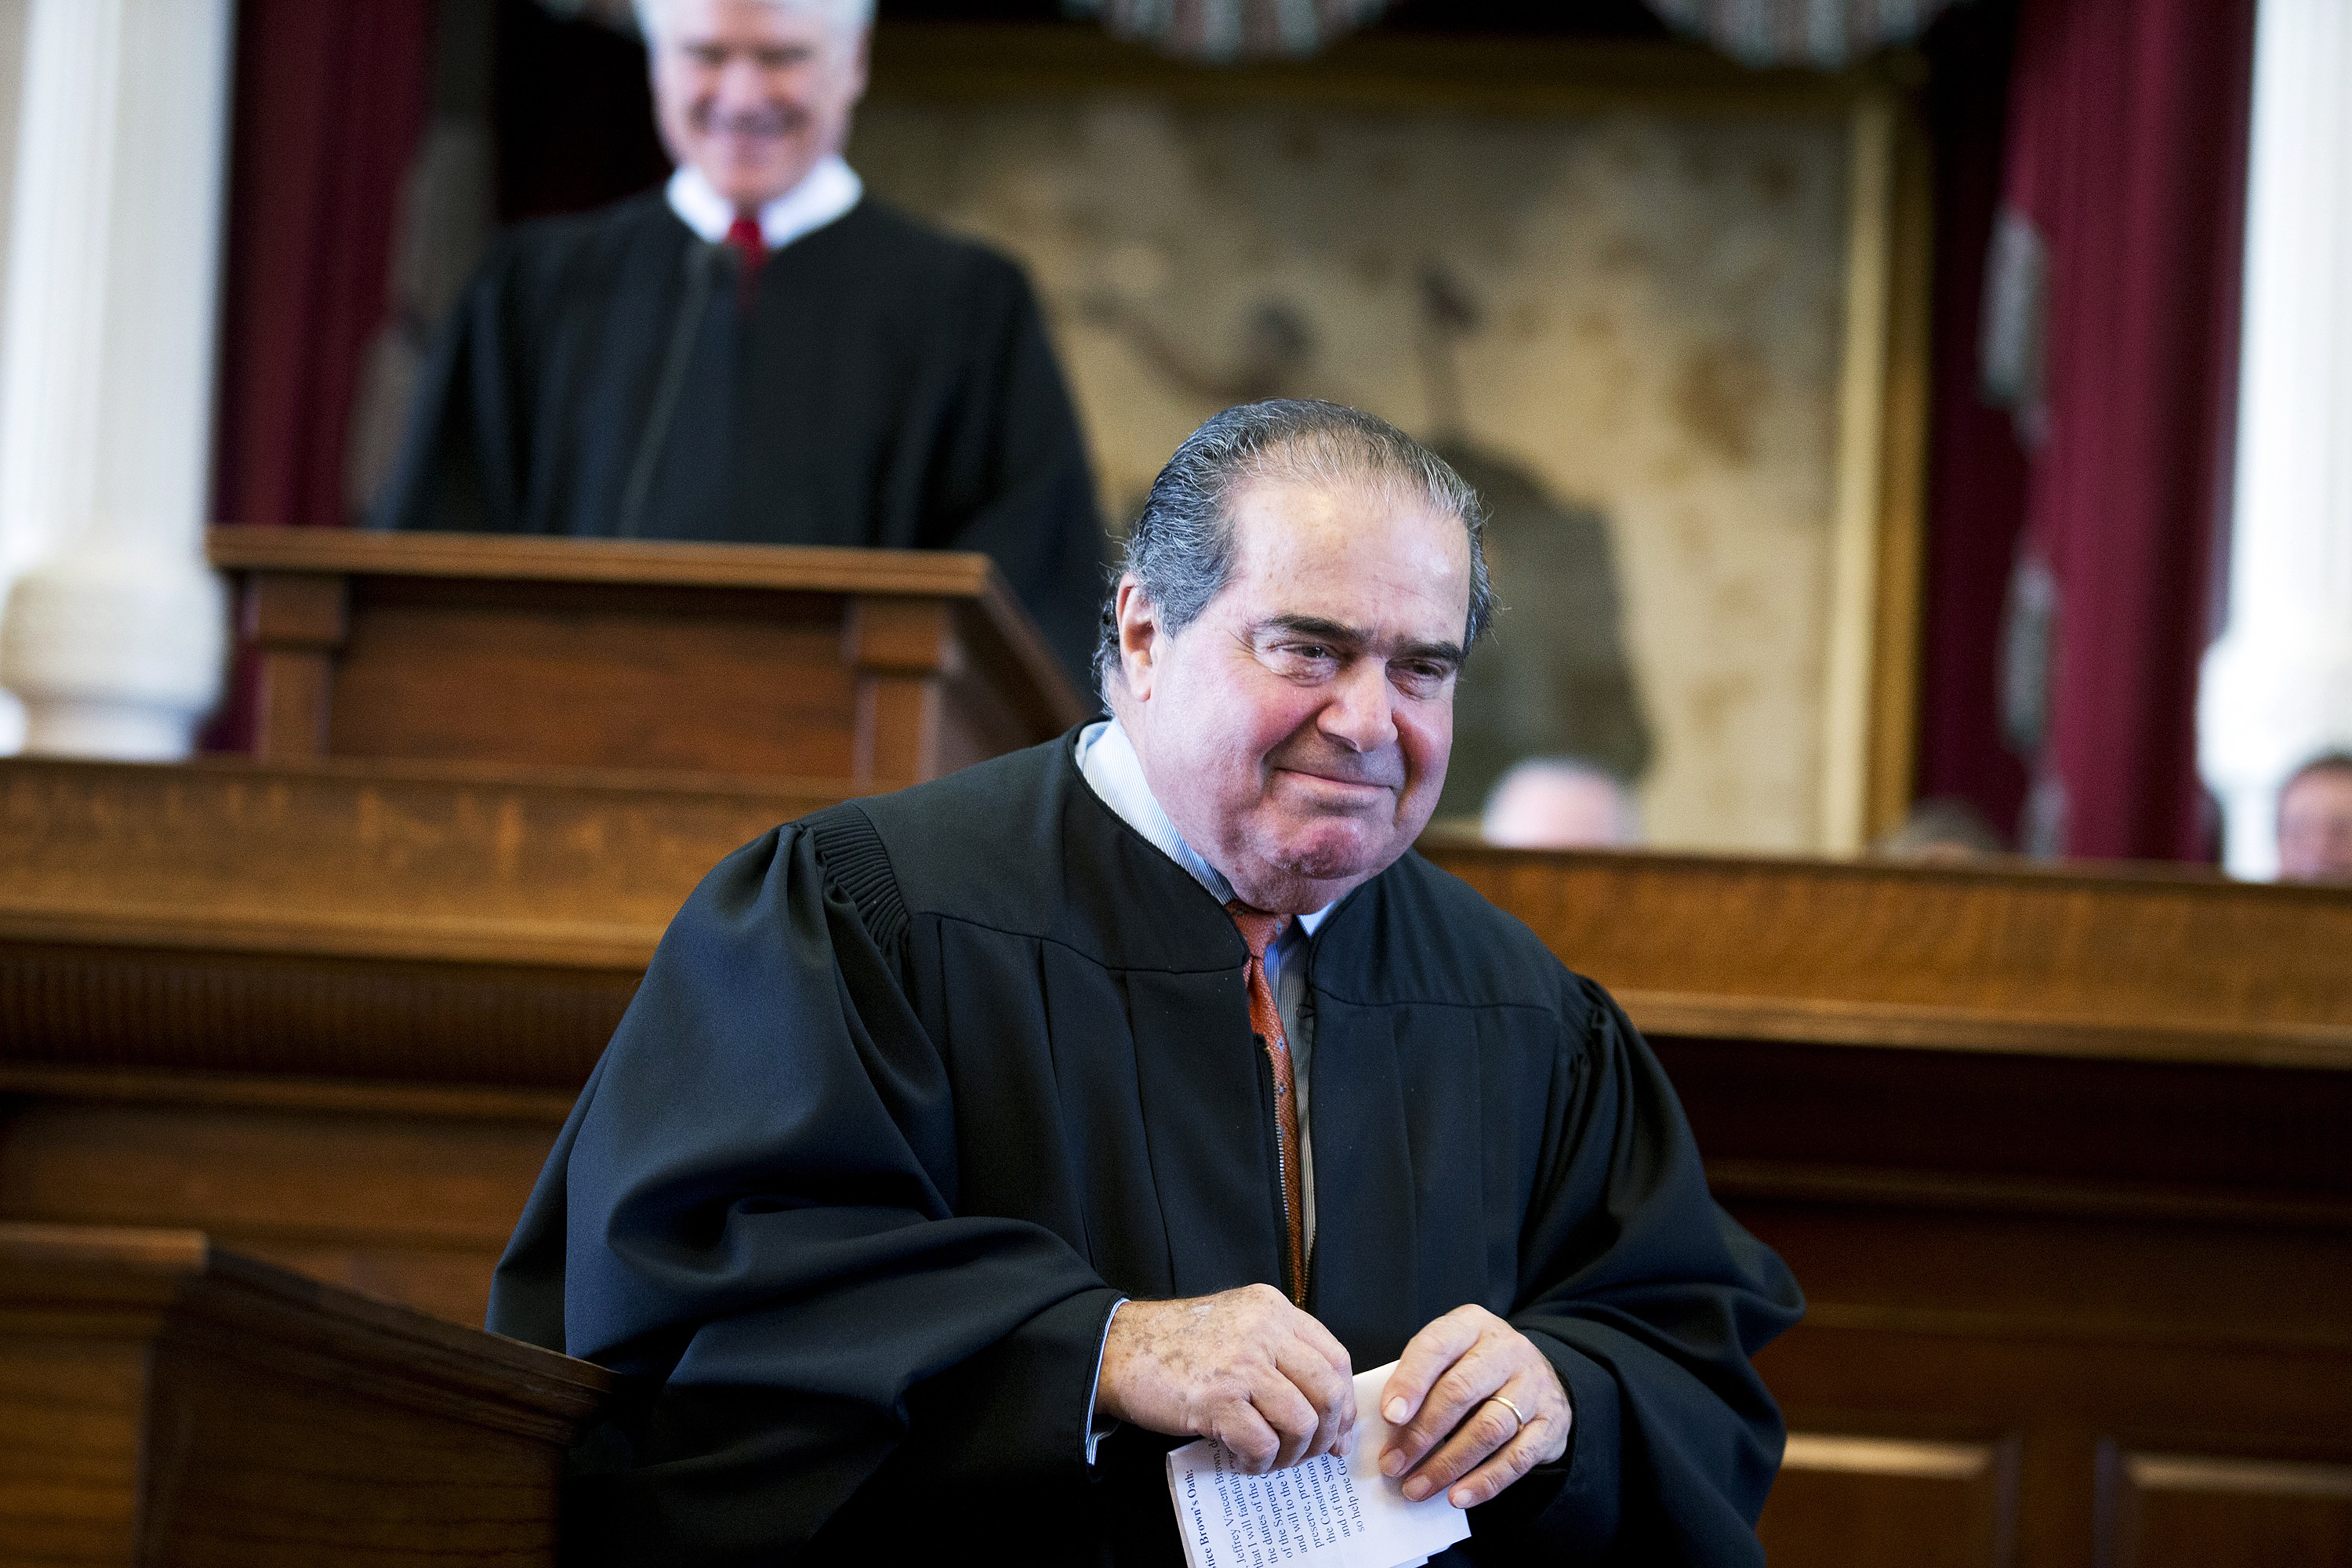 This Nov. 12, 2013 photo shows  Supreme Court Justice Antonin Scalia during the investiture of Texas Supreme Court Chief Justice Nathan Hecht at the Texas Capitol in Austin. (Bob Daemmrich—Corbis)